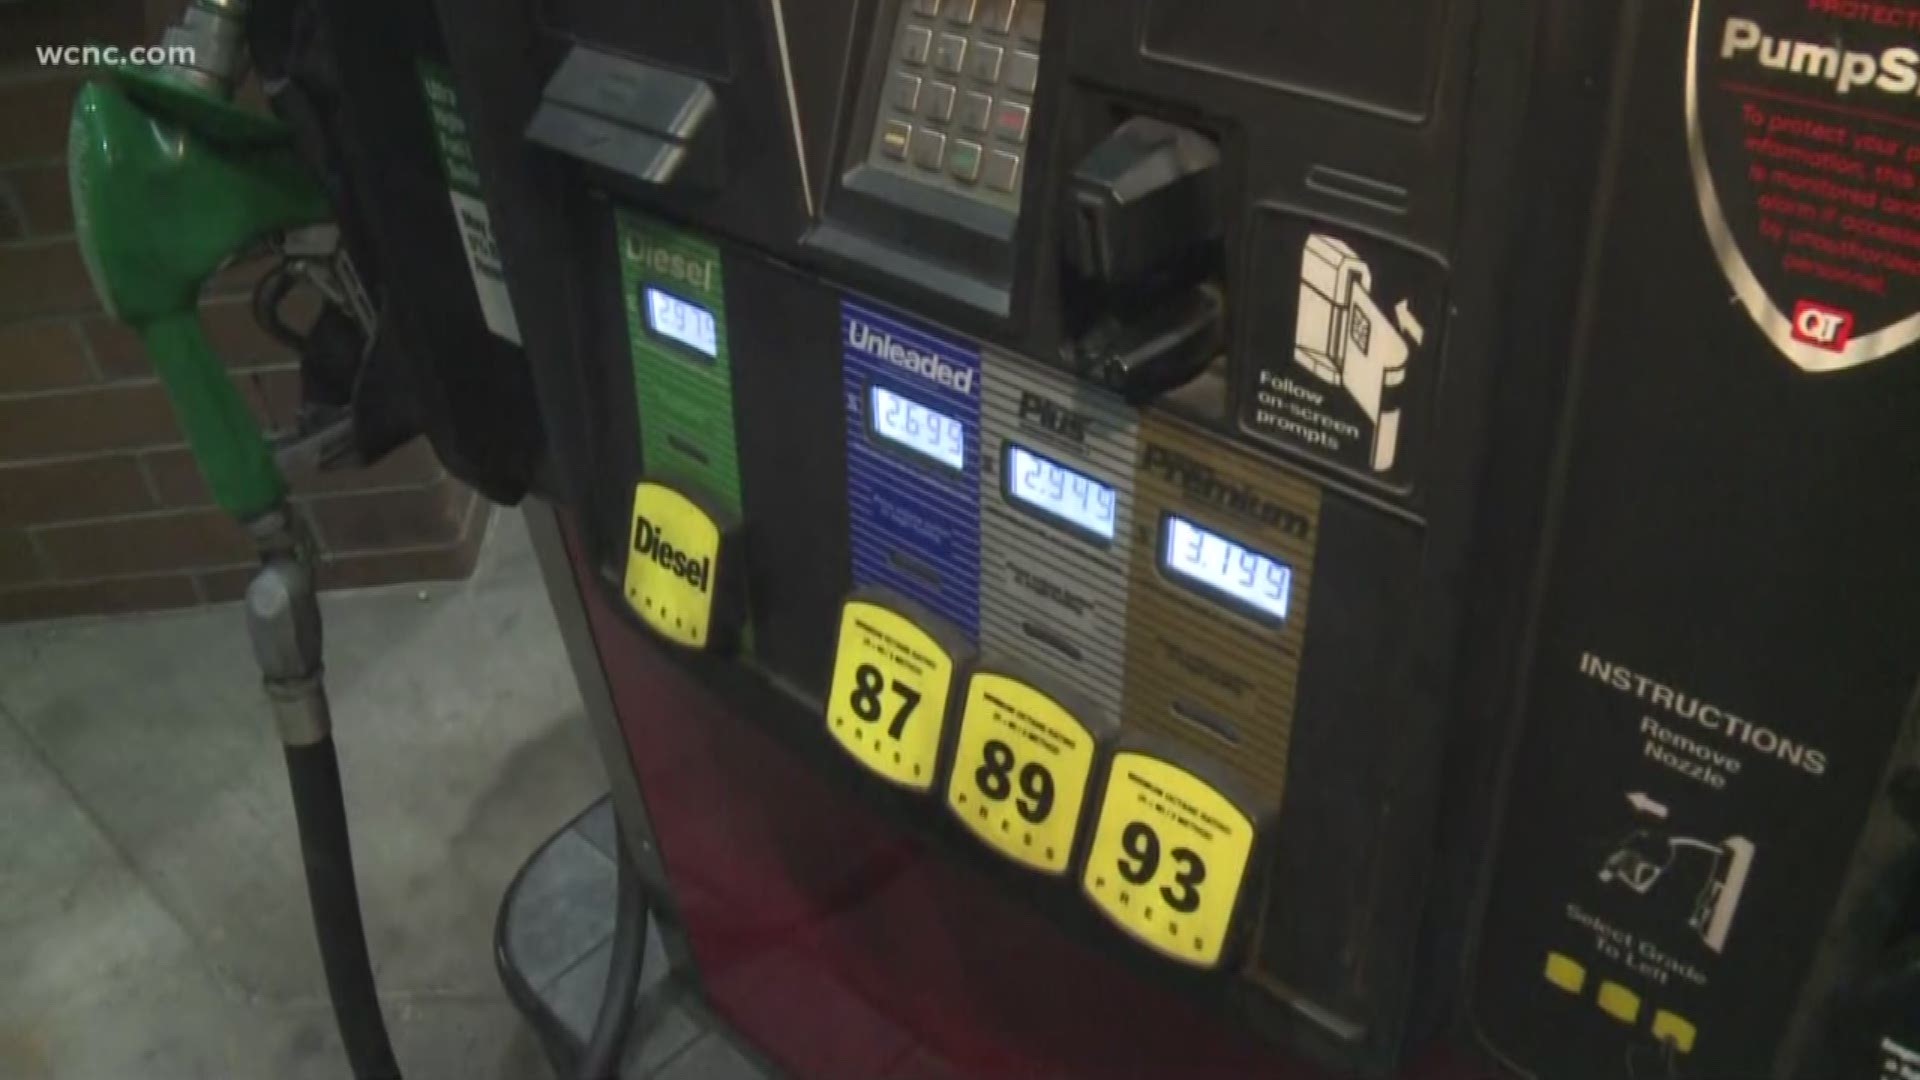 Get ready for a little pain at the pump. Gas prices are climbing and experts say the national average could soon hit $3 a gallon.